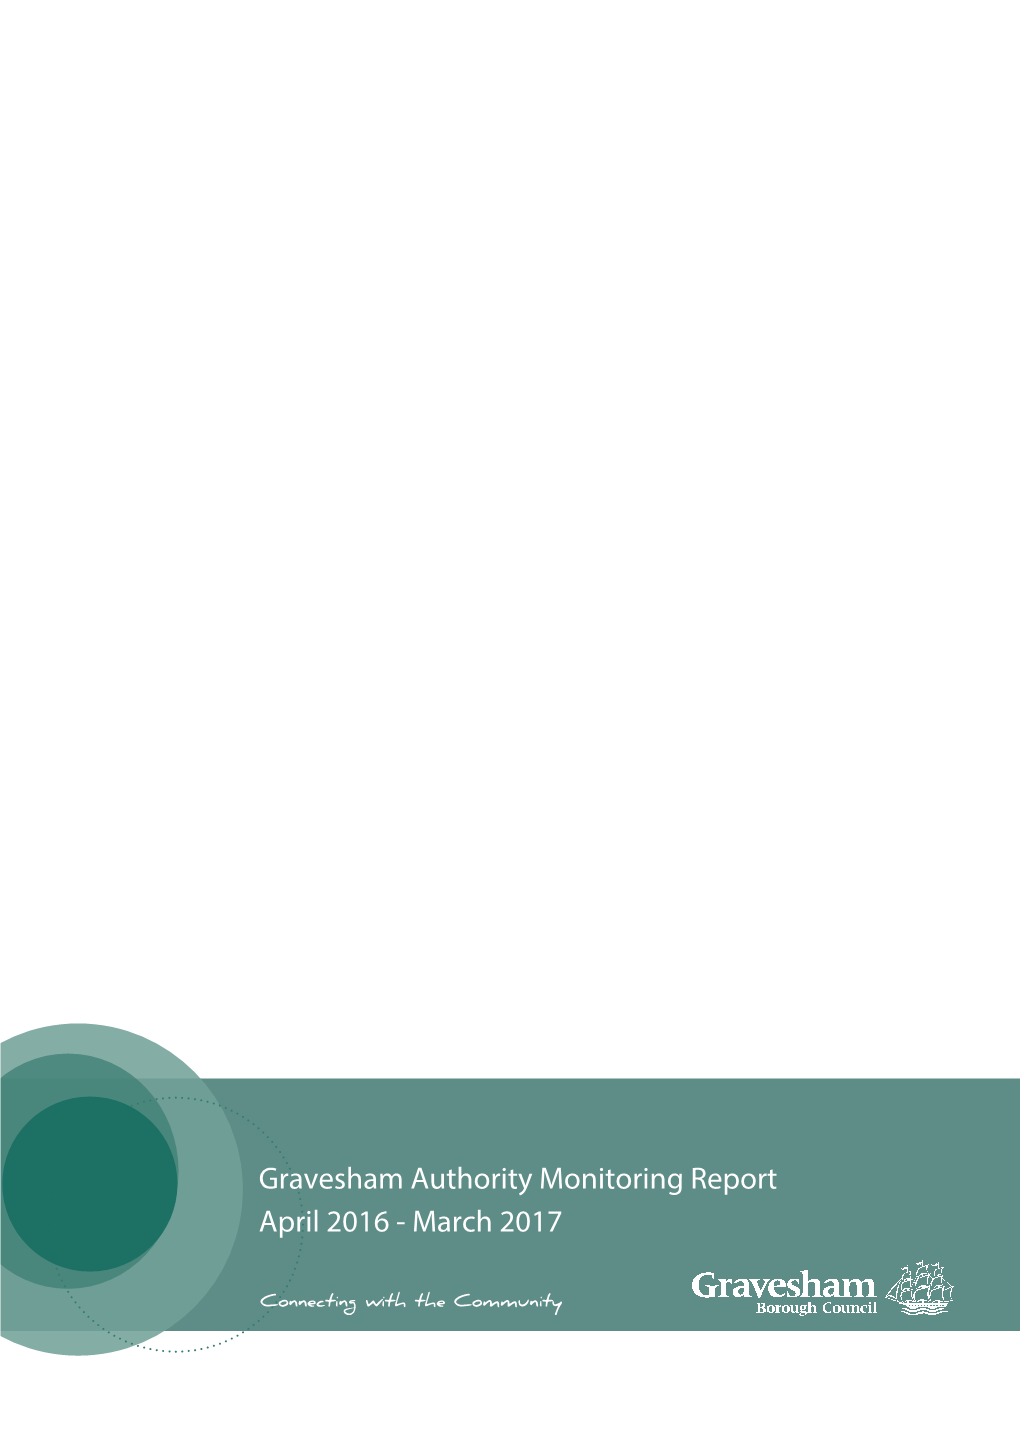 Gravesham Authority Monitoring Report April 2016 - March 2017